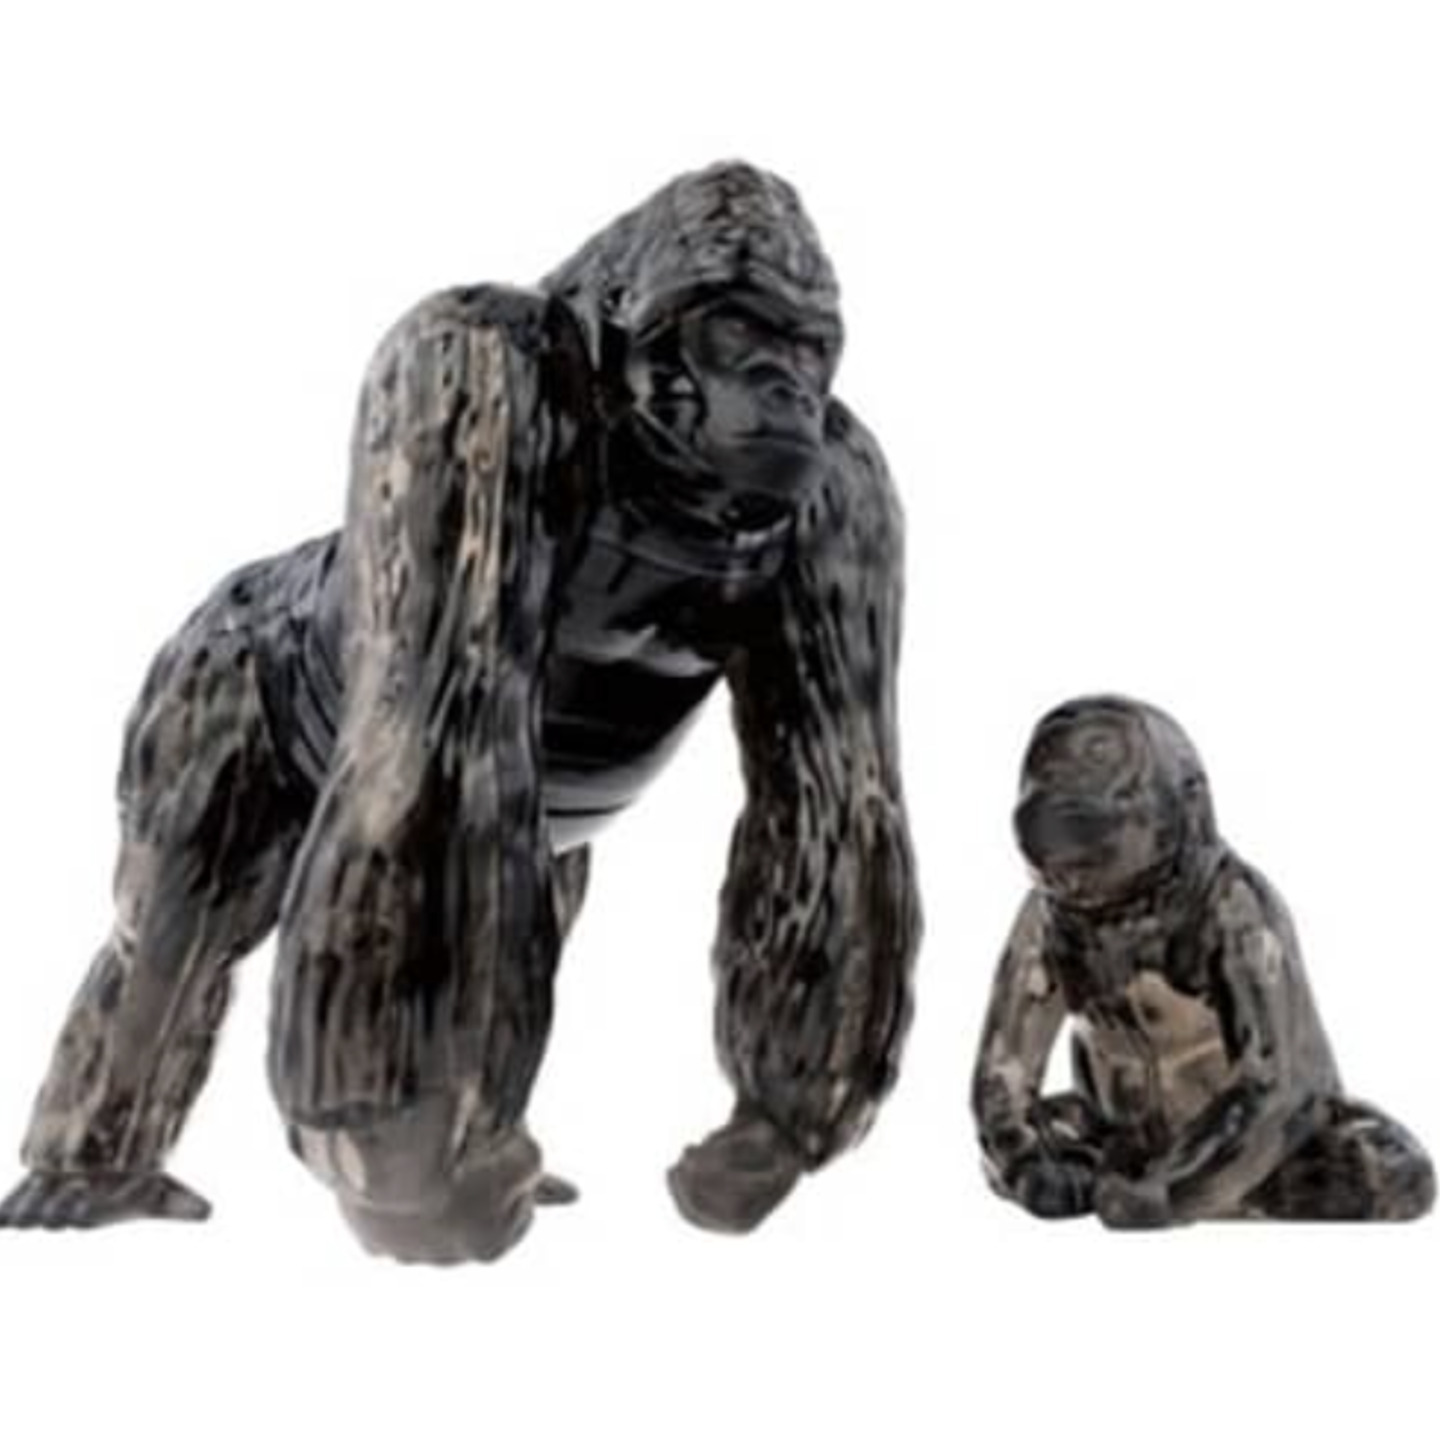 Jigsaw 3D Crystal Puzzle Gorilla and Baby